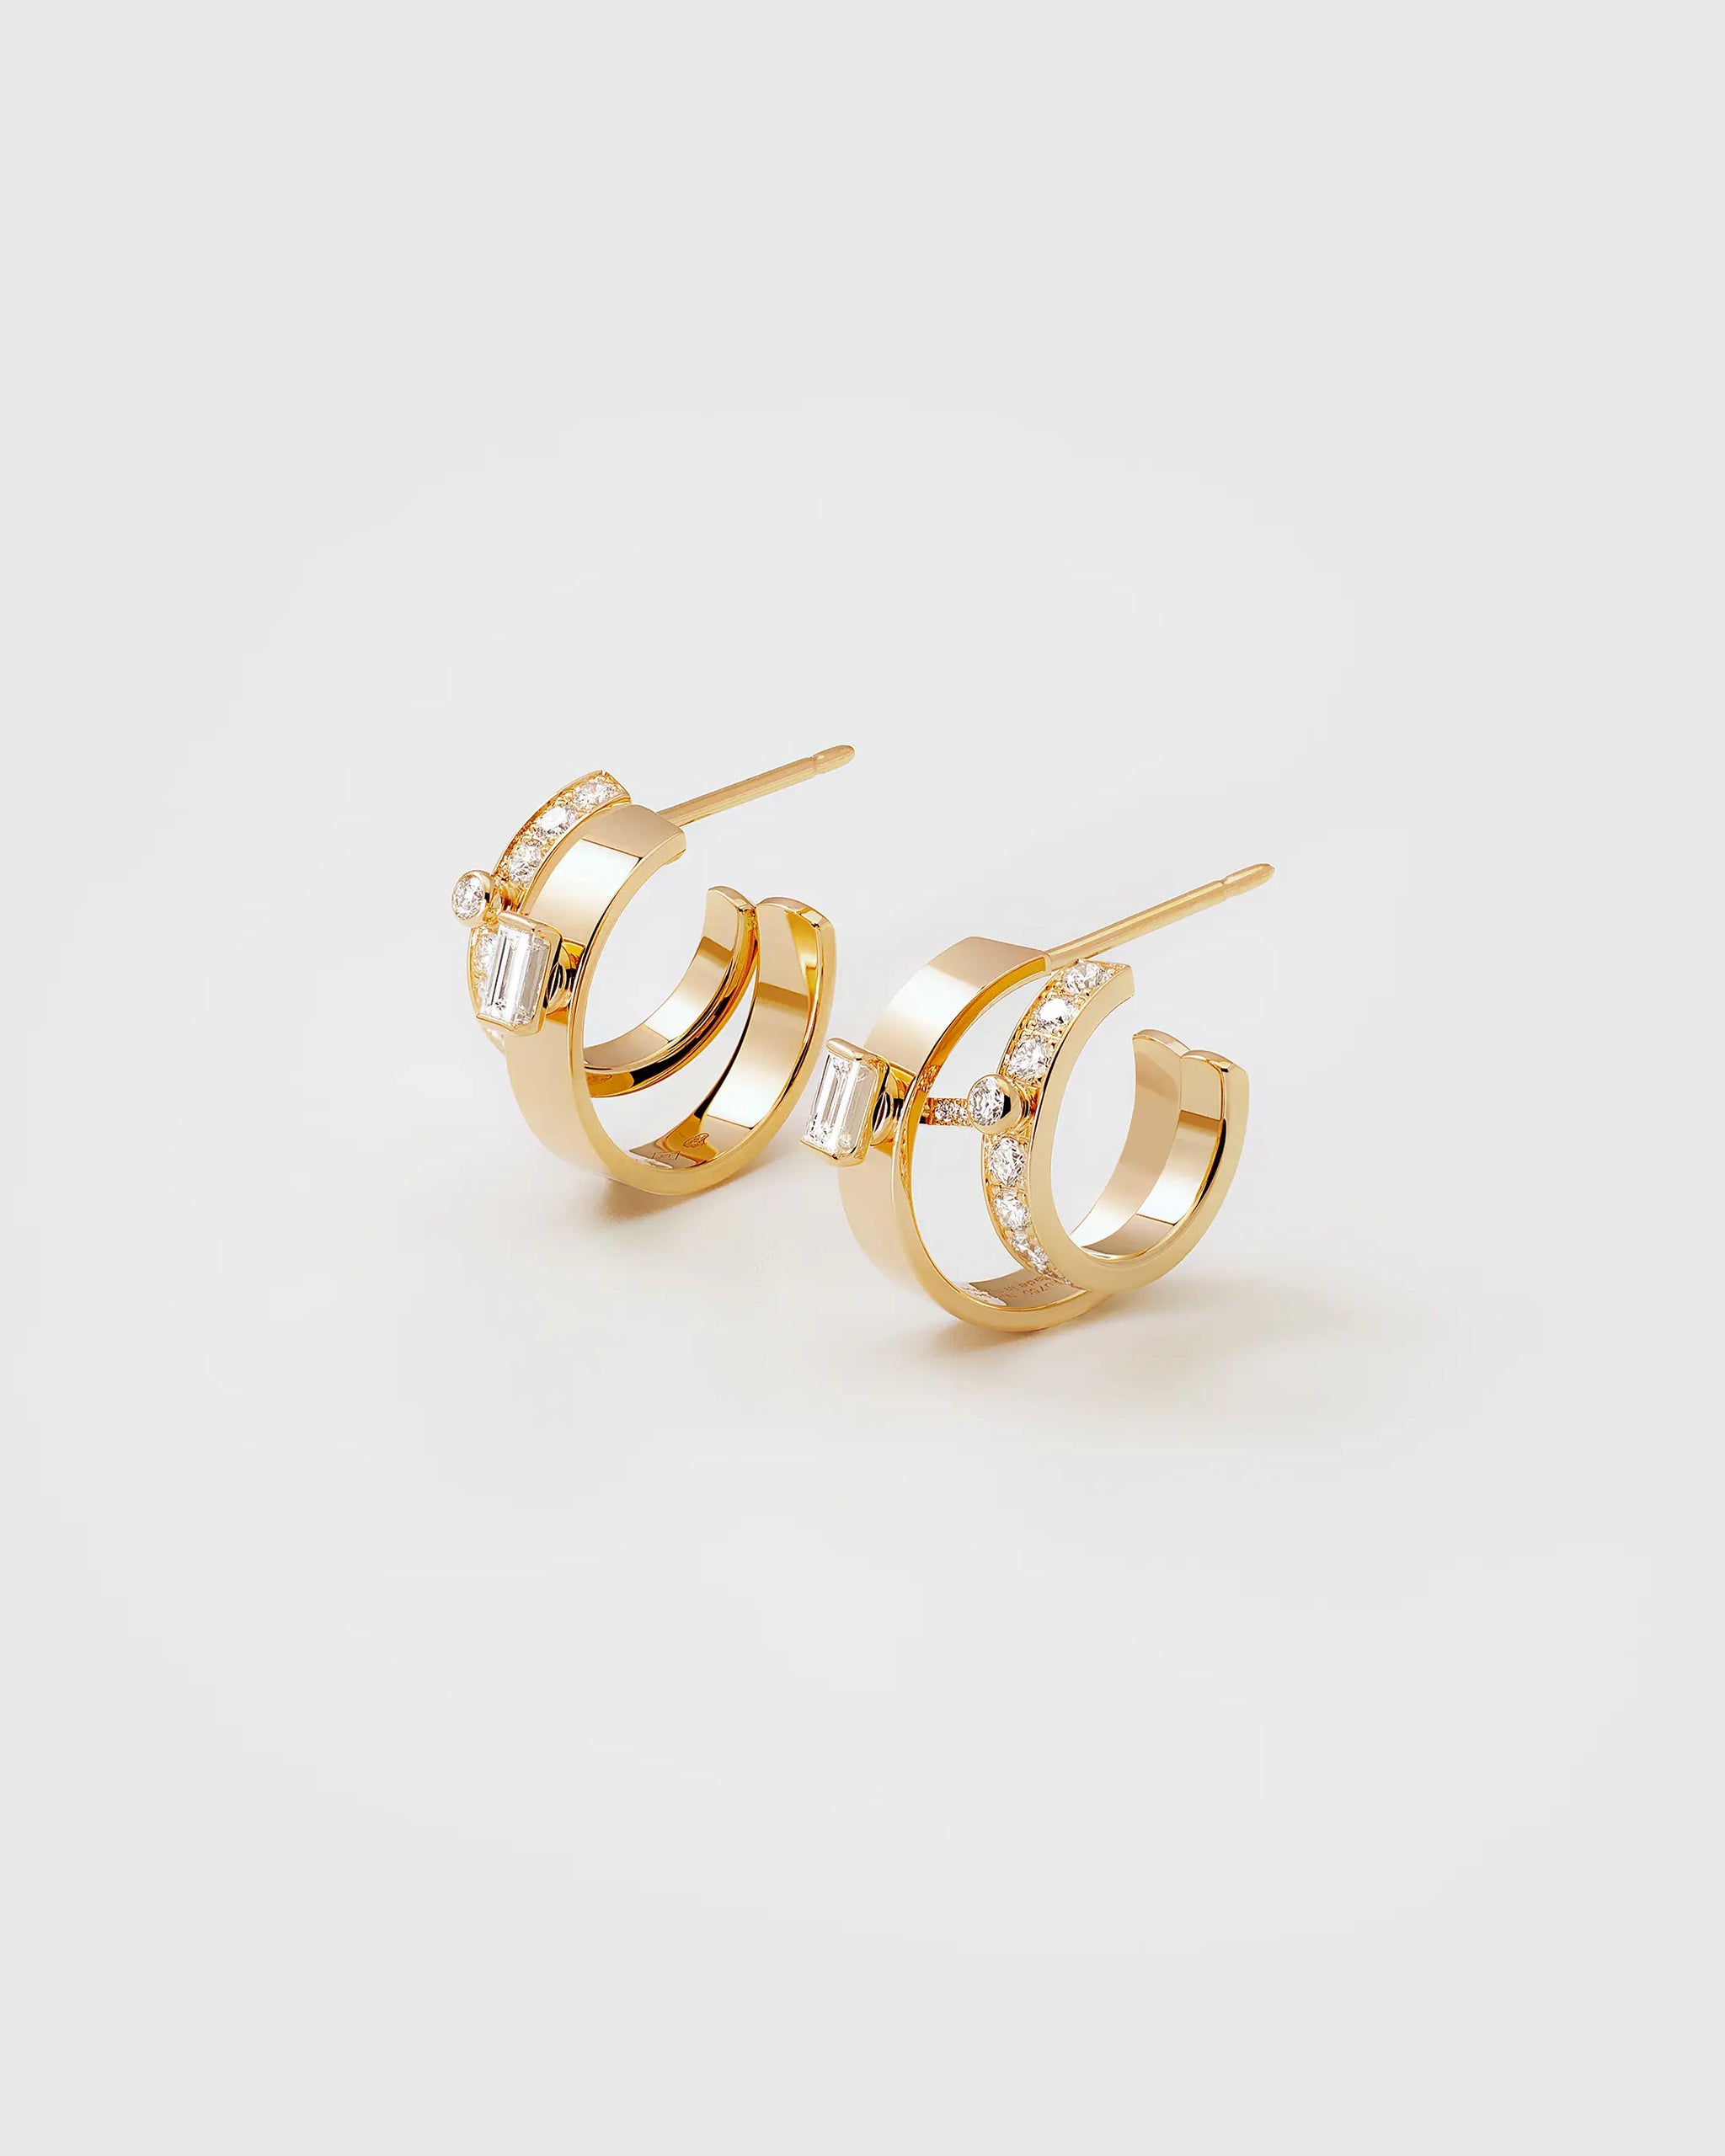 Dinner Date Mood Hoops in Yellow Gold - 1 - Nouvel Heritage